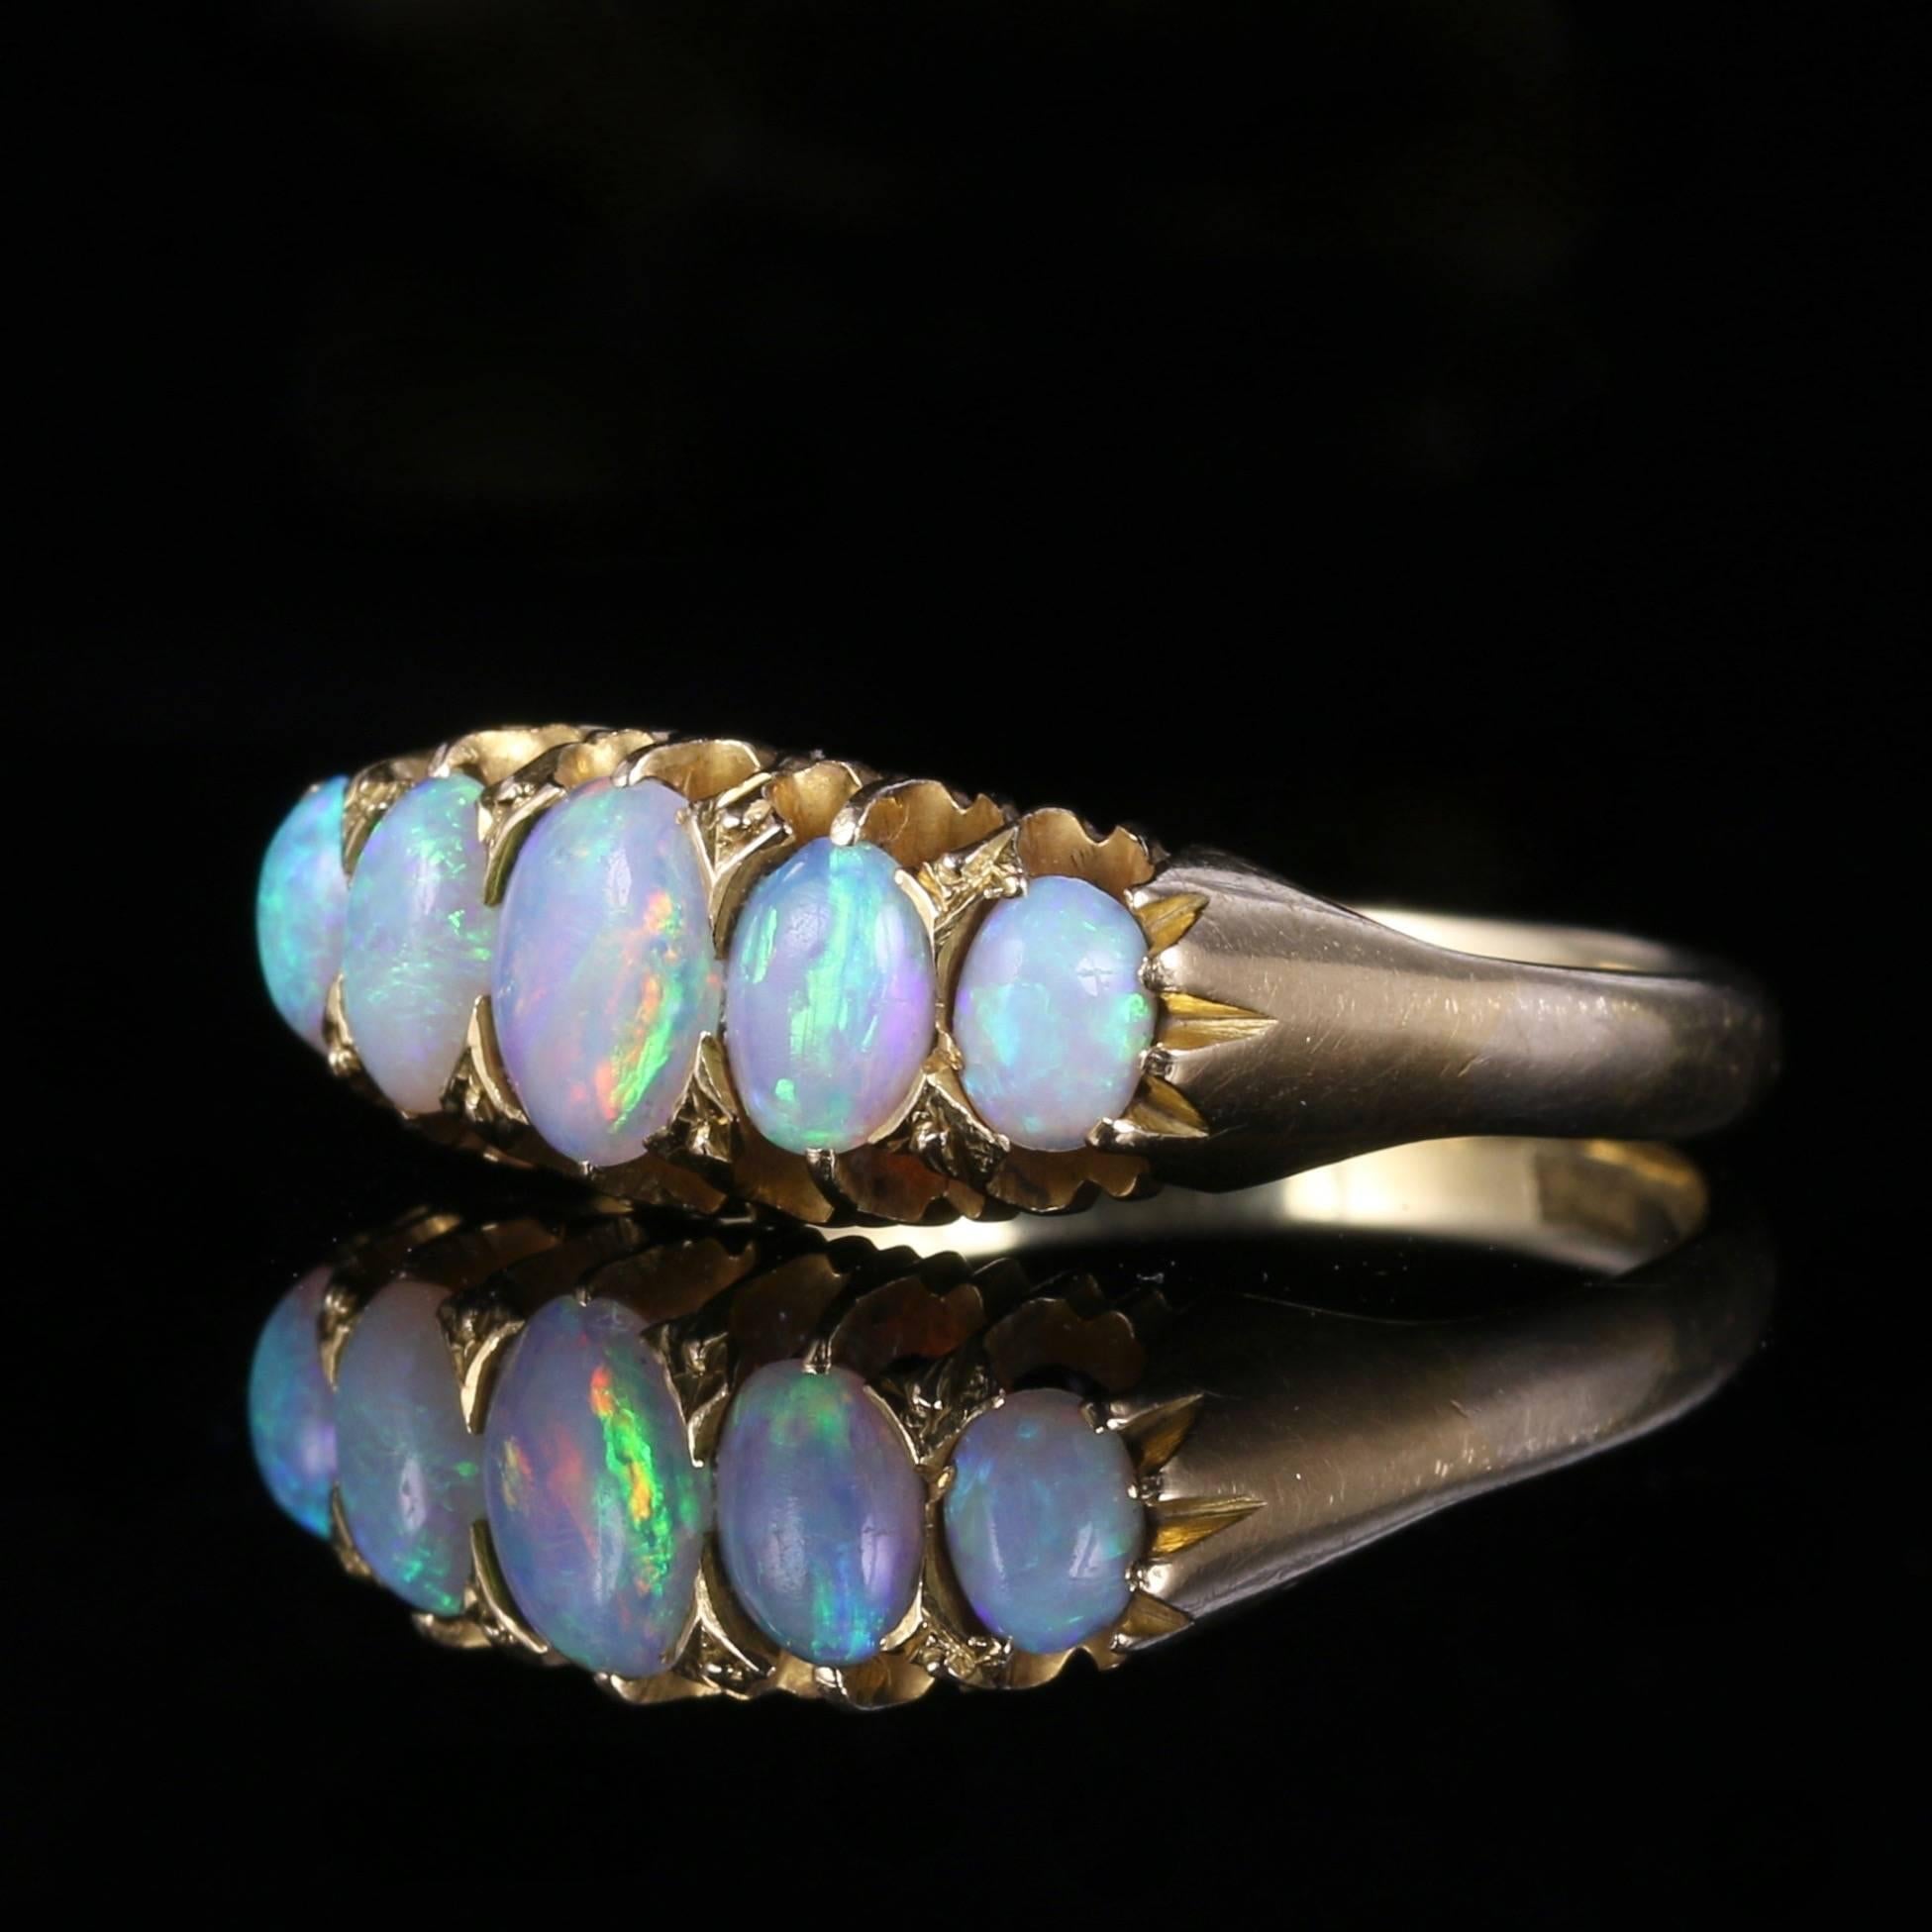 This fabulous Victorian ring is set with five lovely natural colourful opals, It is a genuine Victorian ring, Circa 1880.

This lovely colourful Opal ring is hallmarked 18ct gold inside the shank.

The striking natural Opals are a kaleidoscope of